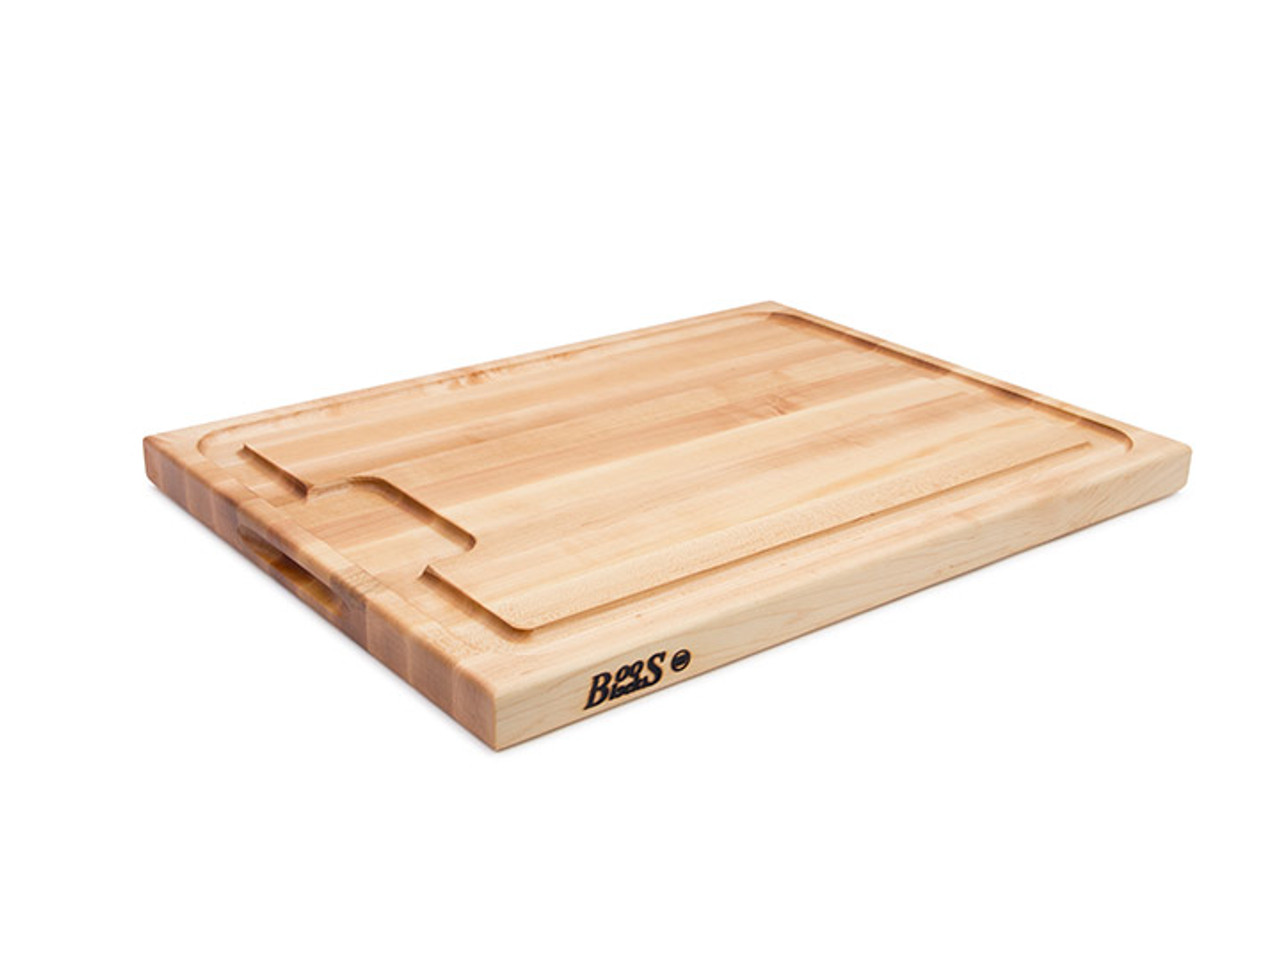 Kitchen Cutting Board Easy-Grip Handles Antibacterial, Non-Porous